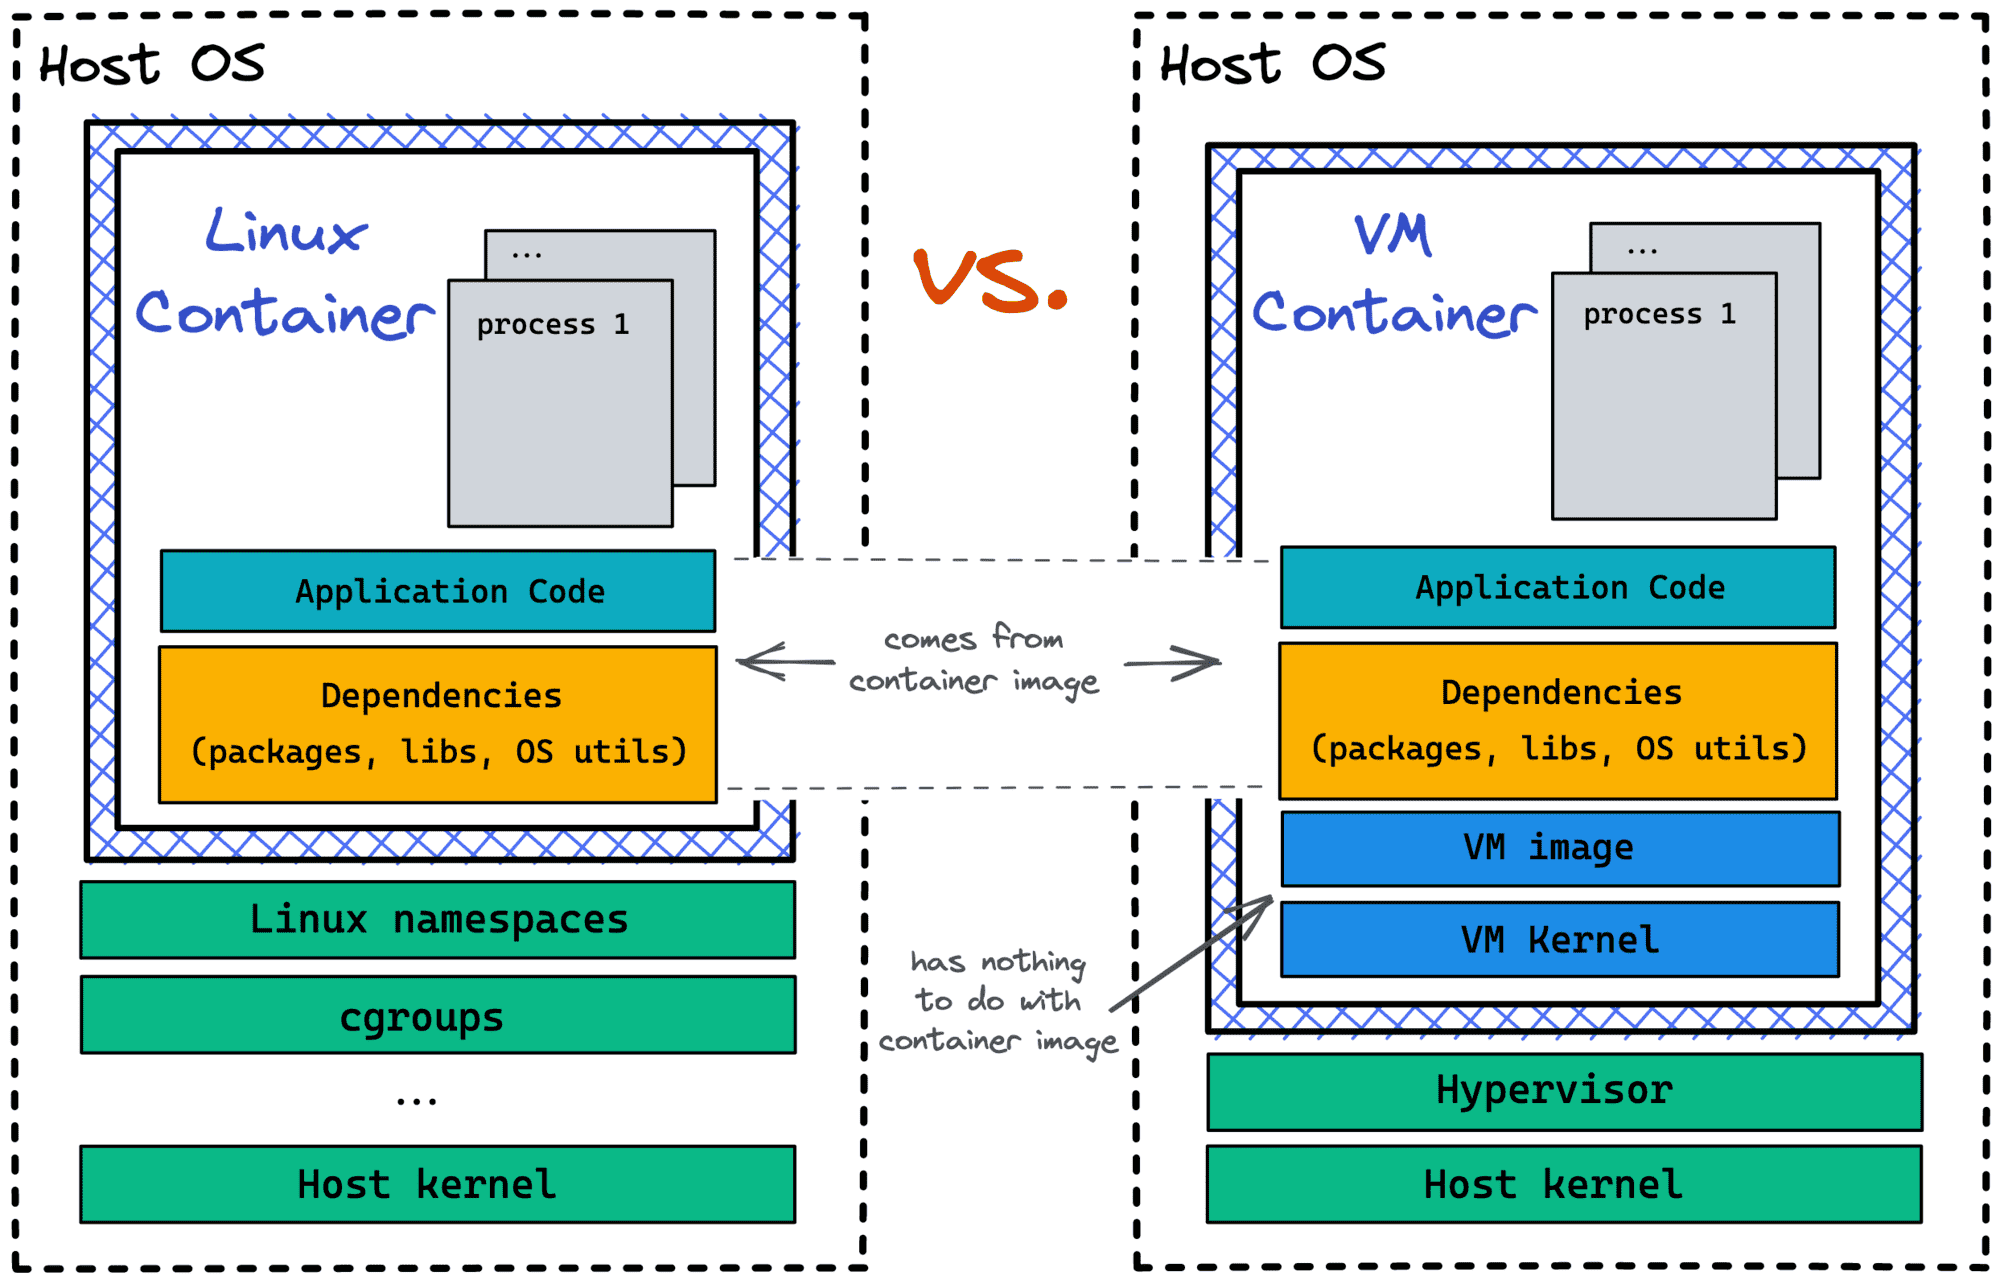 Linux containers vs. VM containers.